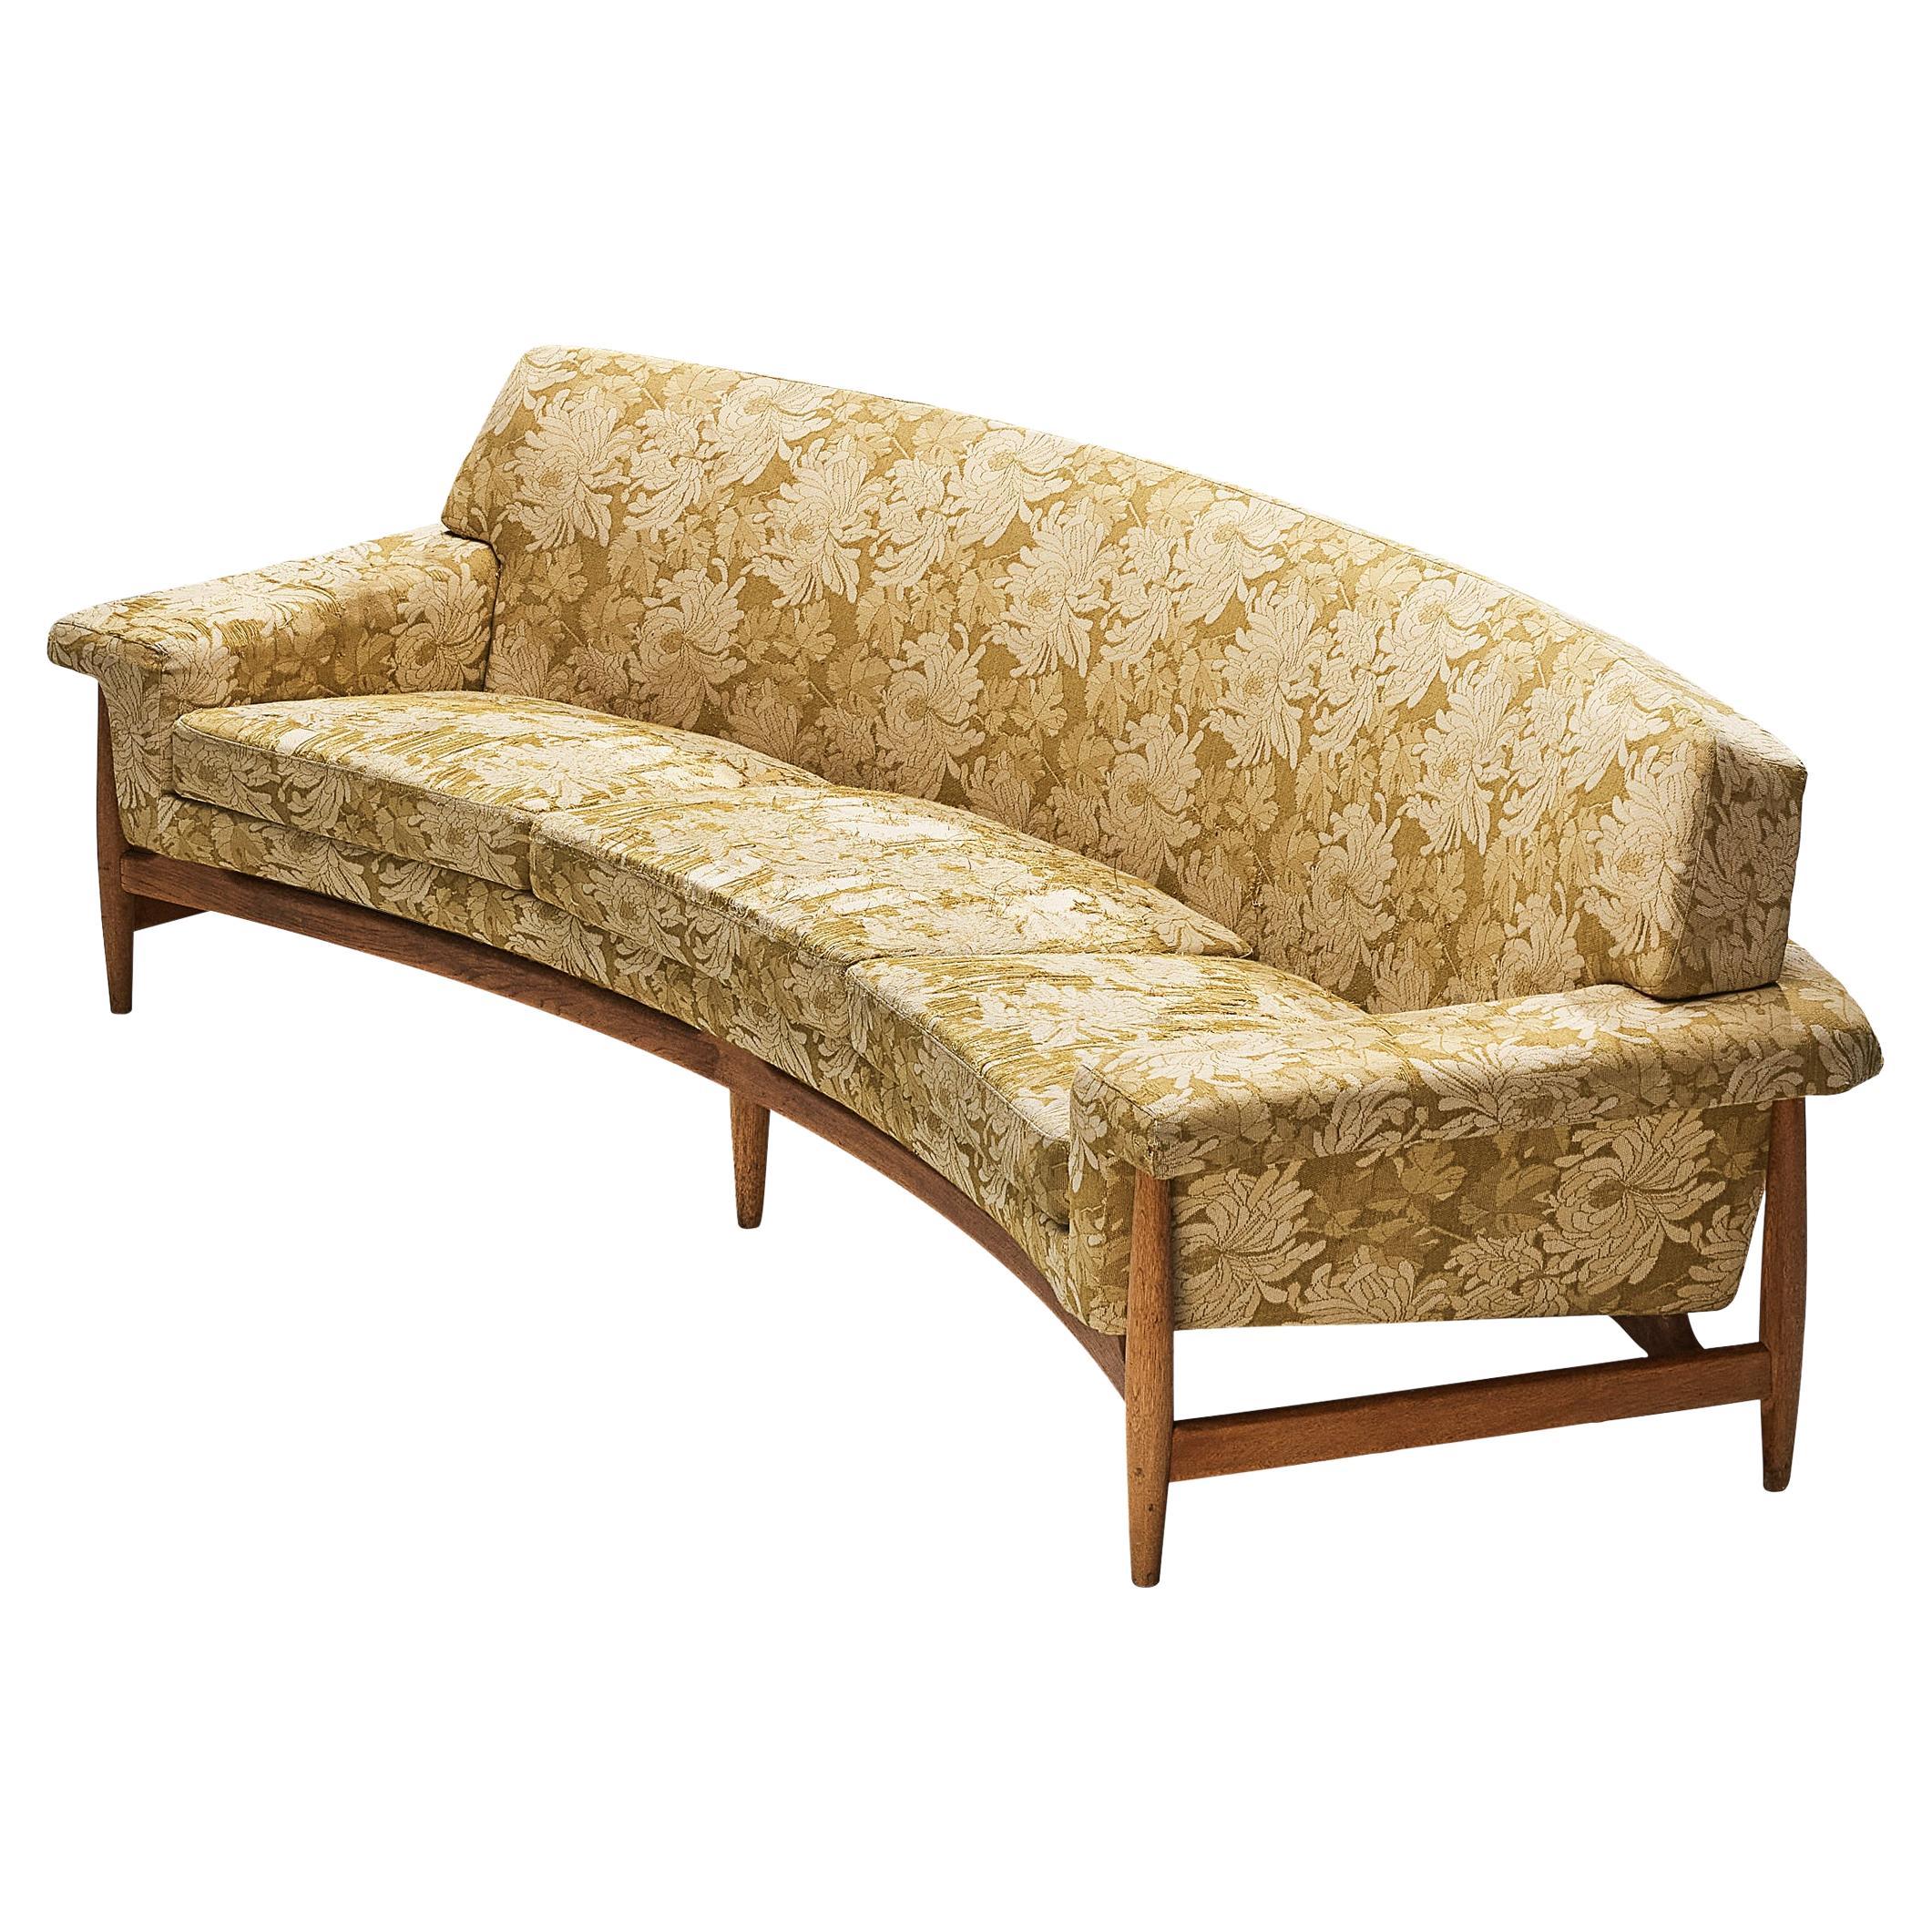 Johannes Andersen for Trensum Sofa in Teak and Mustard Yellow Floral Fabric 